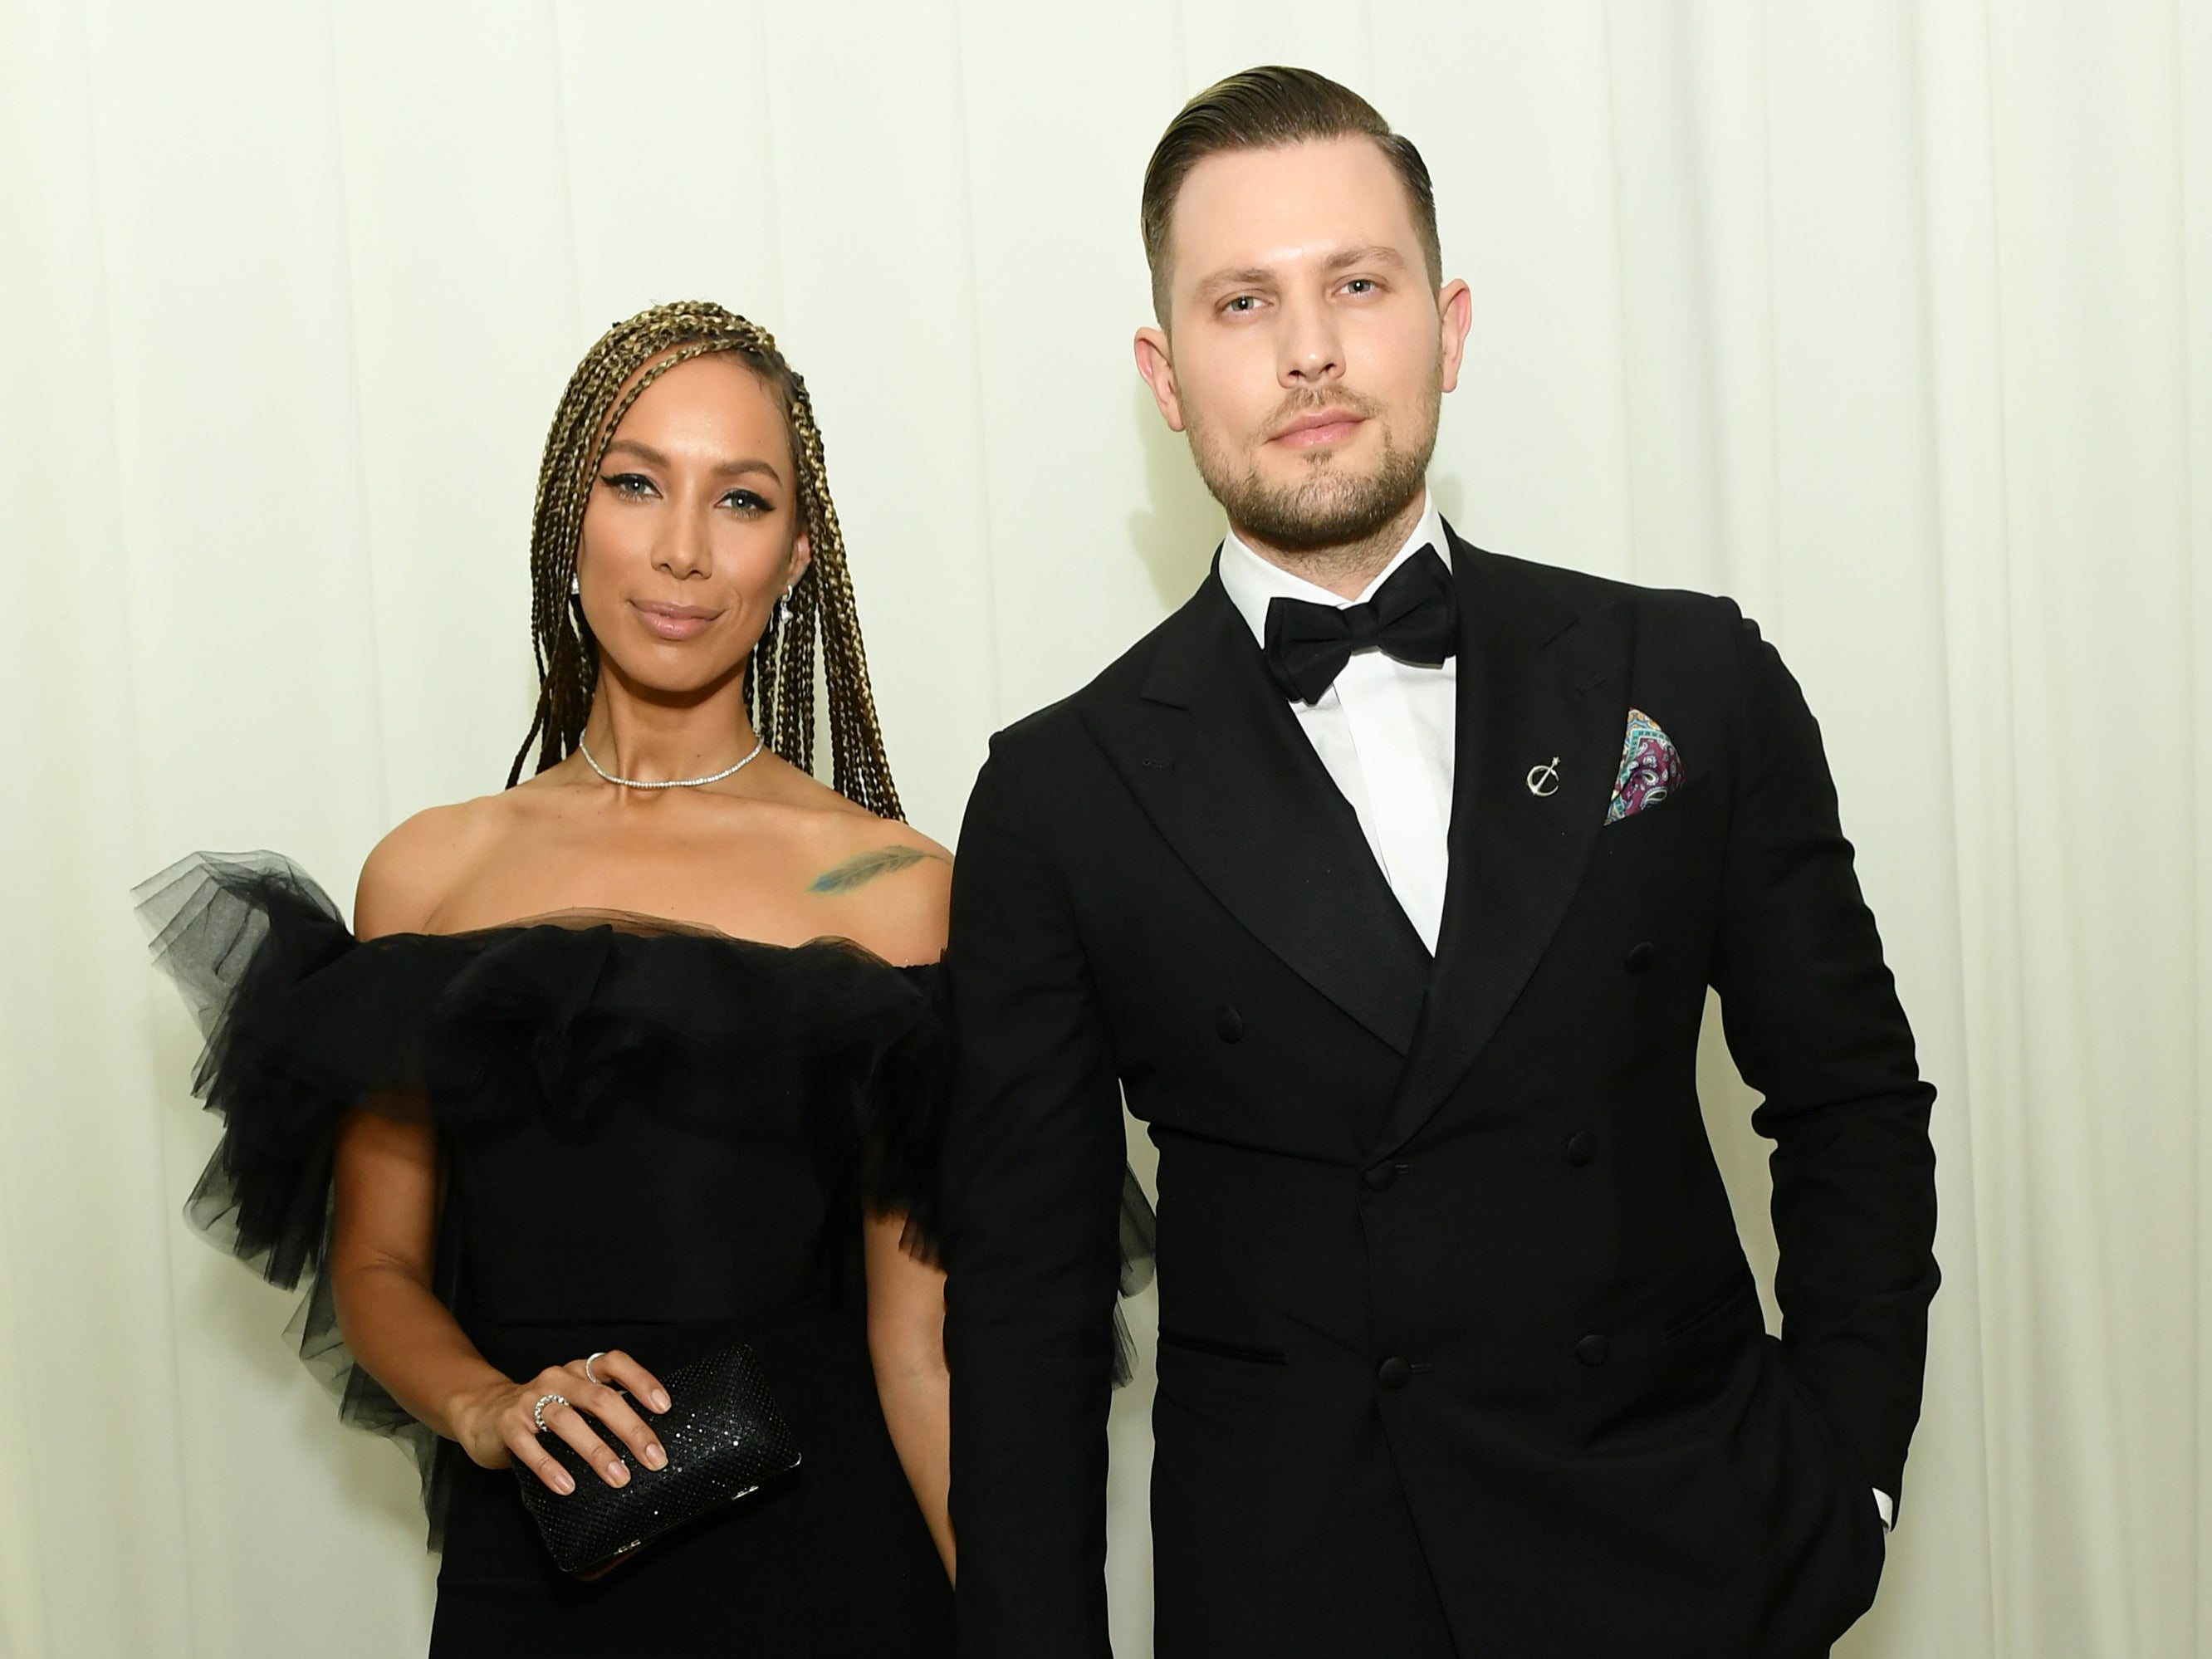 Leona Lewis and husband Dennis Jauch in February 2020